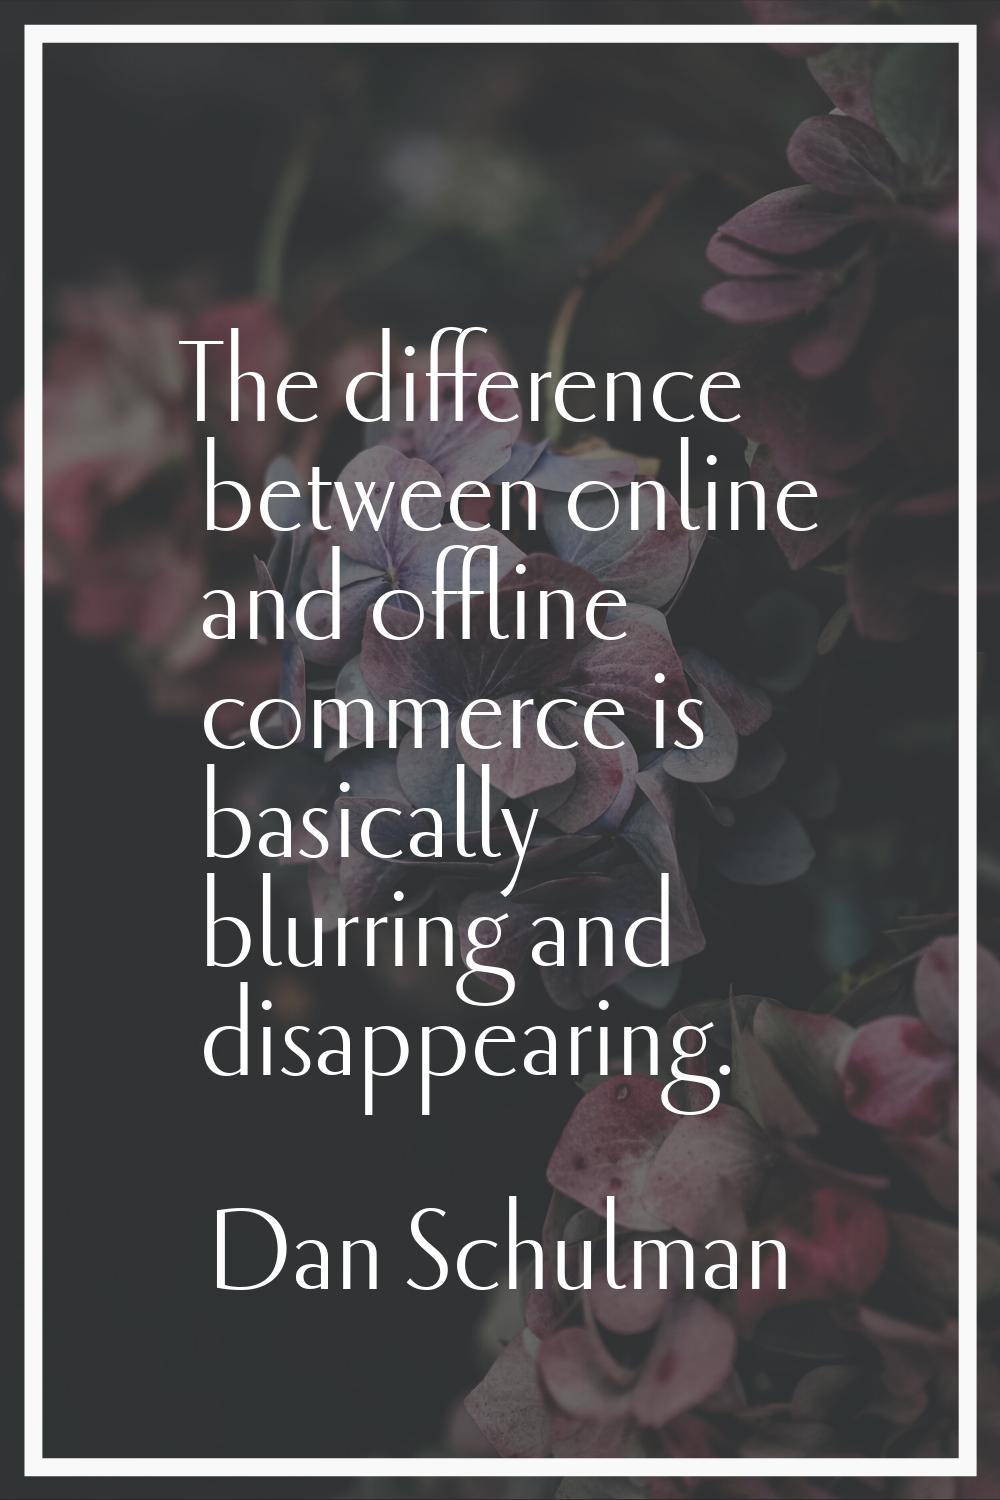 The difference between online and offline commerce is basically blurring and disappearing.